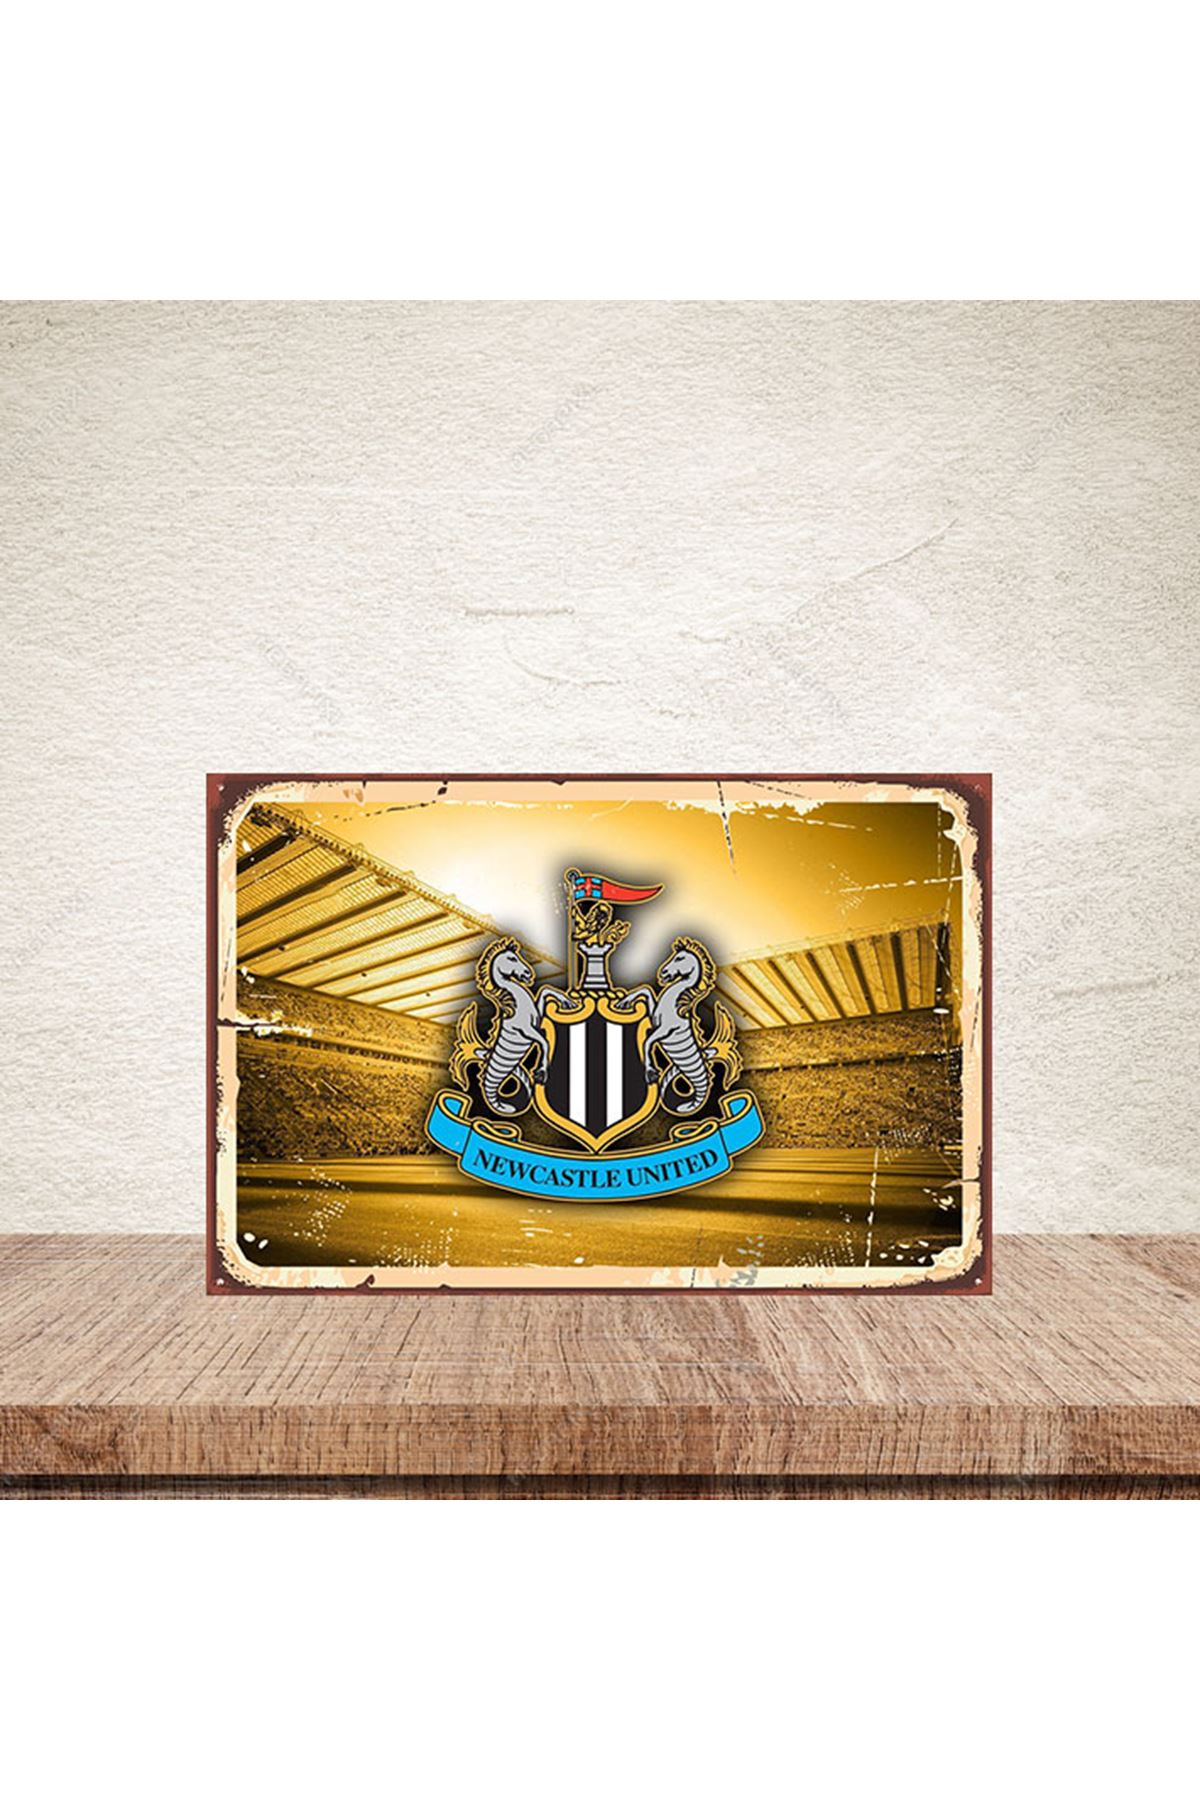 NEWCASTLE UNITED -AHŞAP POSTER